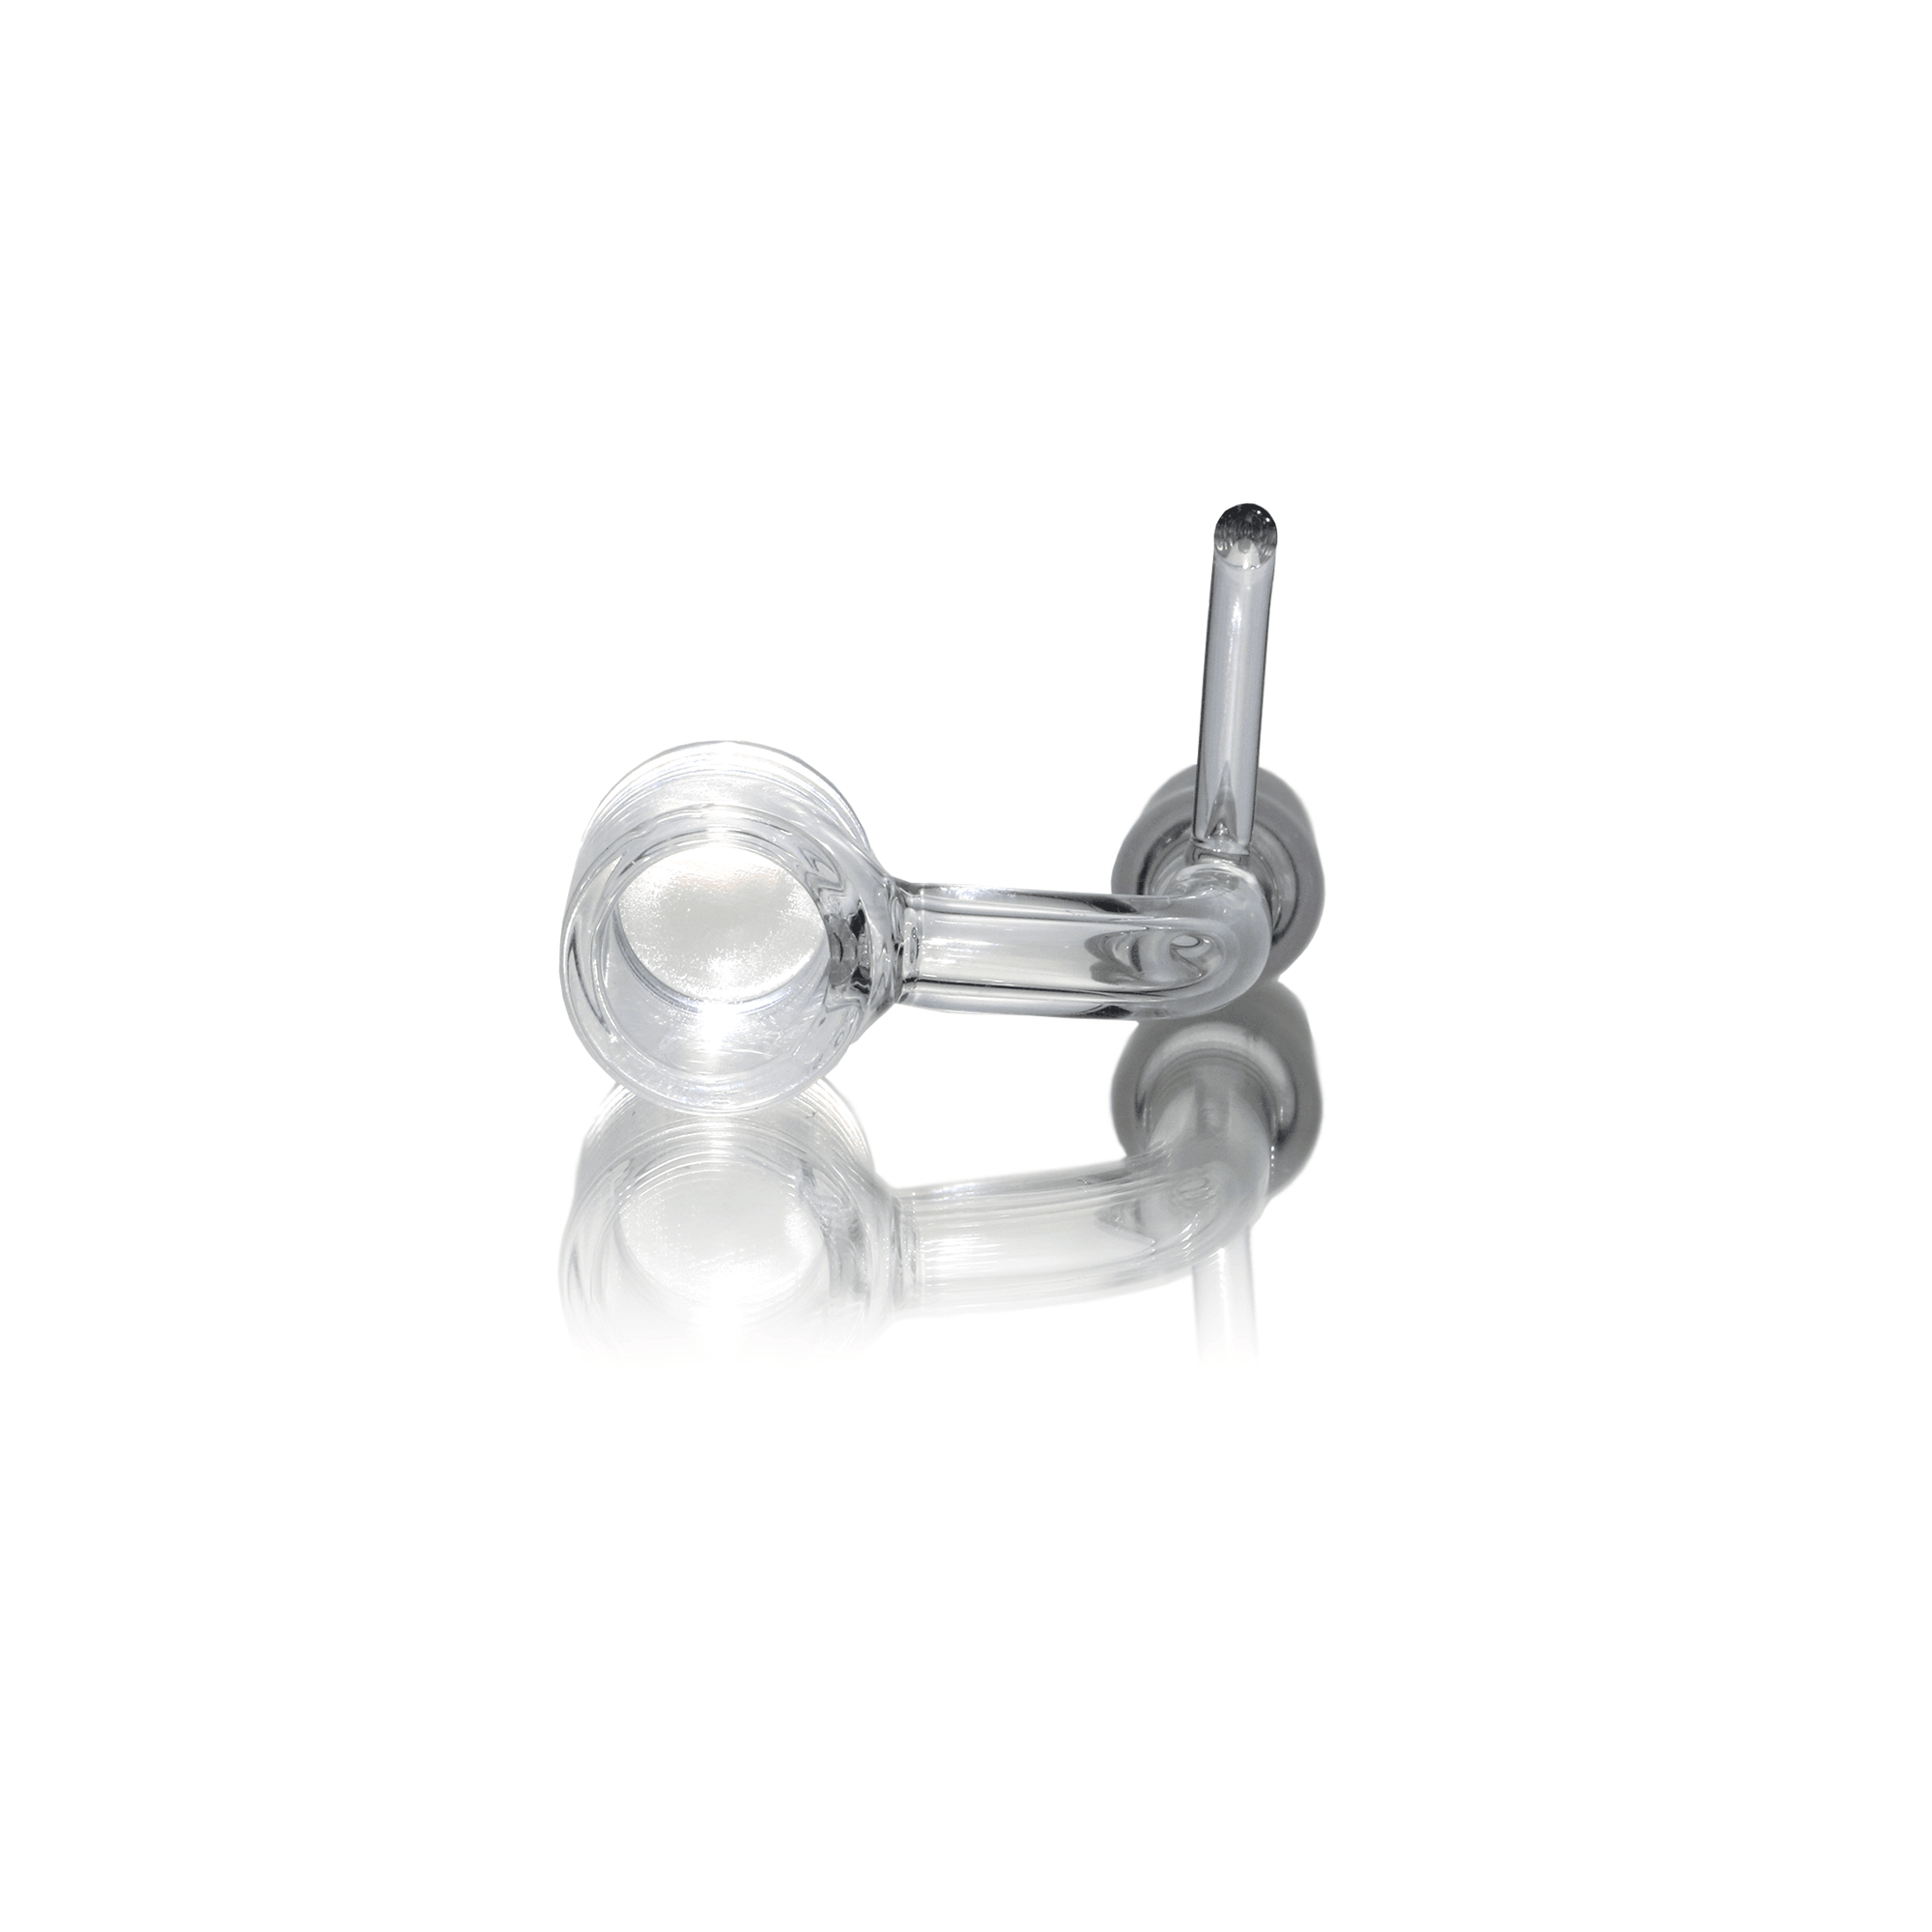 14mm Male Quartz E-Banger for 20mm Coil With Saucer Cap | Prone View | the dabbing specialists